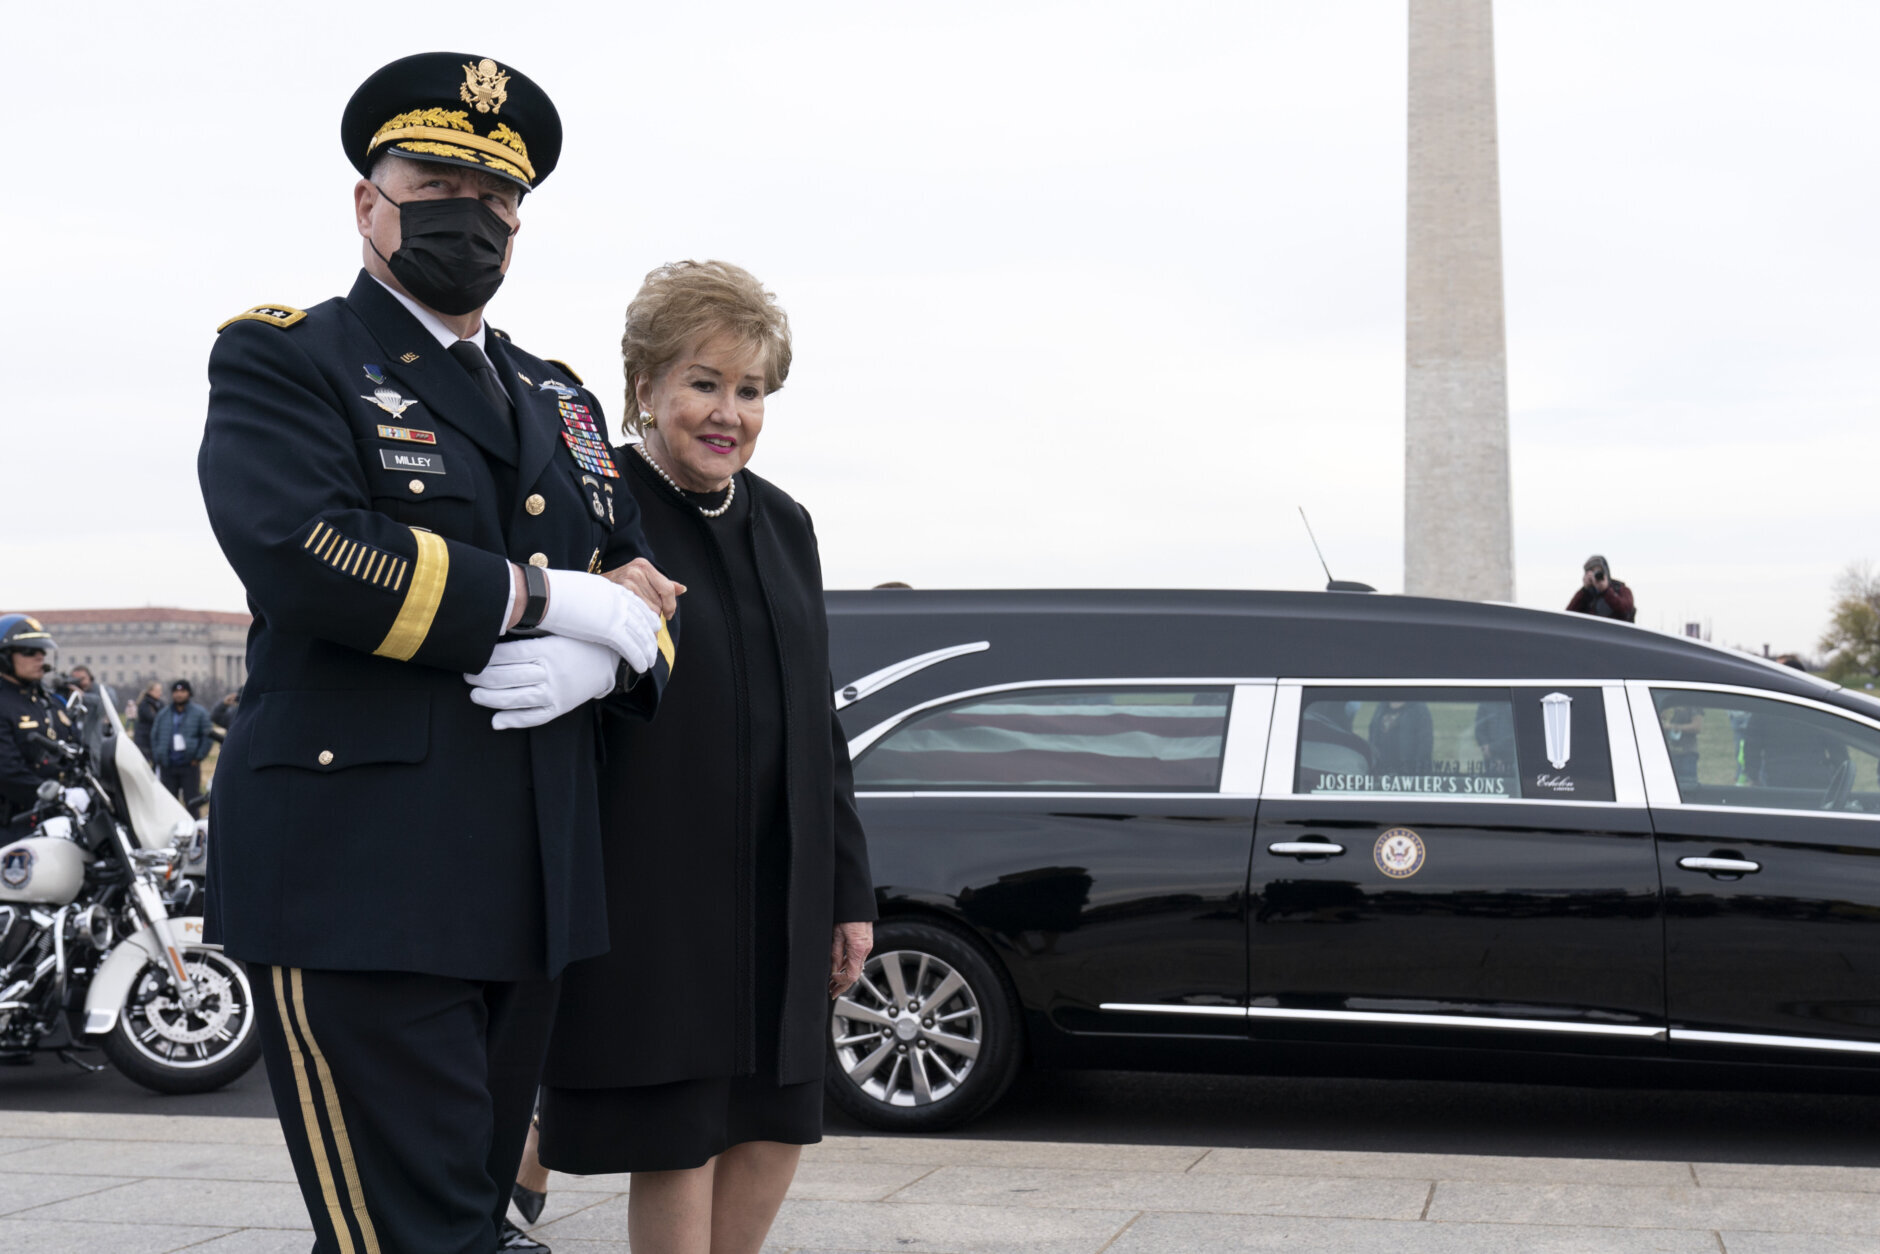 Former Sen. Elizabeth Dole accompanied by Chairman of the Joint Chiefs of Staff Gen. Mark Milley walk past her late husband's hearse during a floral wreath ceremony in honor of former Sen. Bob Dole, R-Kan. at the National World War II Memorial, on Friday, Dec. 10, 2021, in Washington. (AP Photo/Jose Luis Magana)